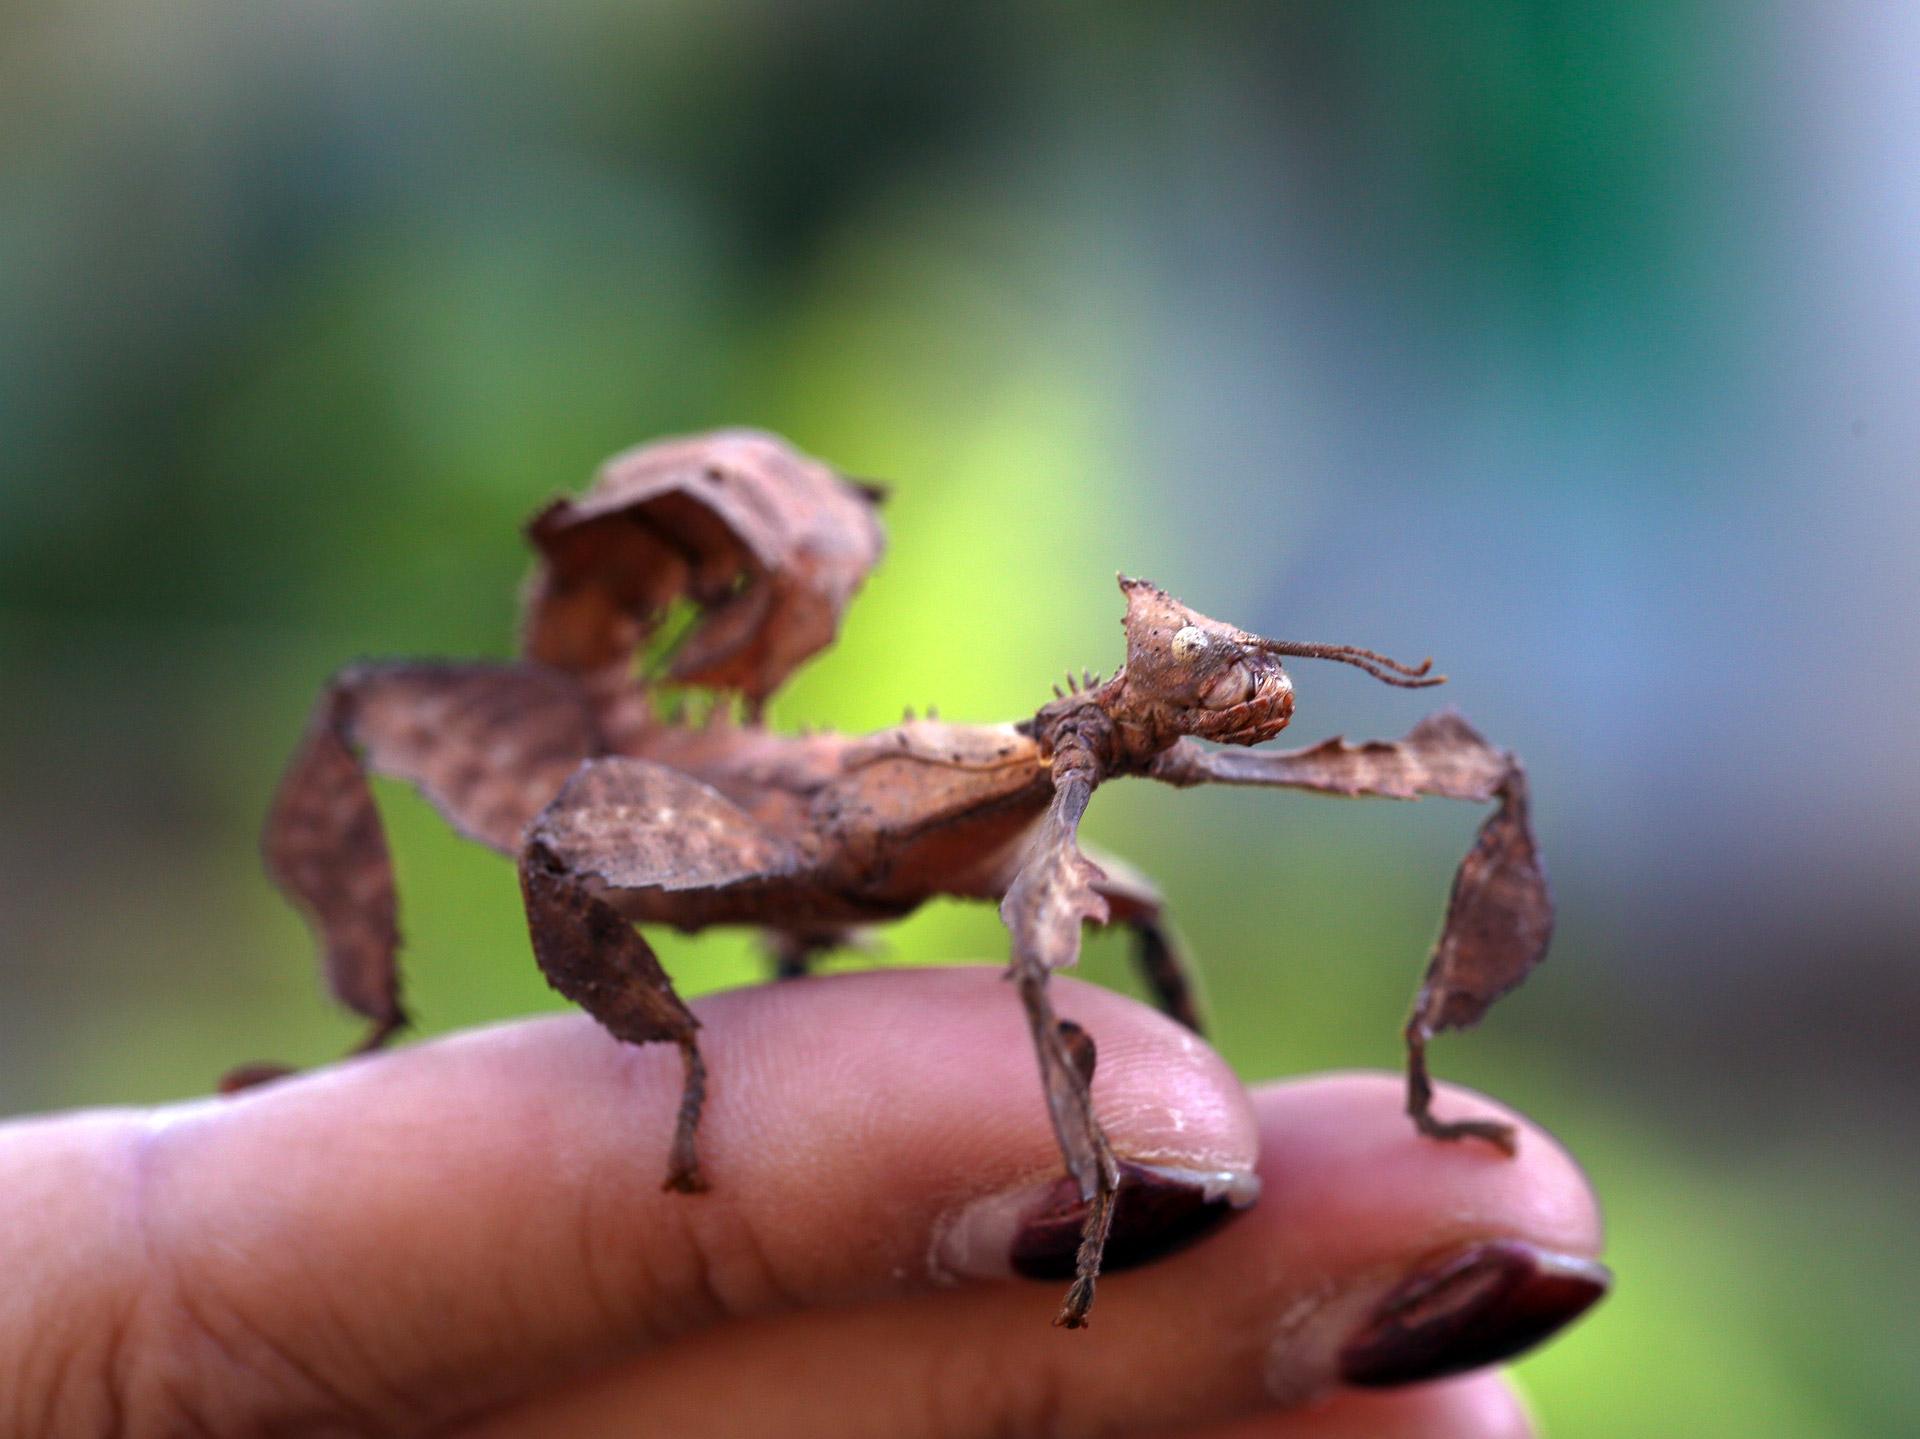 Spiny Leaf Insect by Mario Madrona via Flickr (CC BY-NC-SA 2.0)